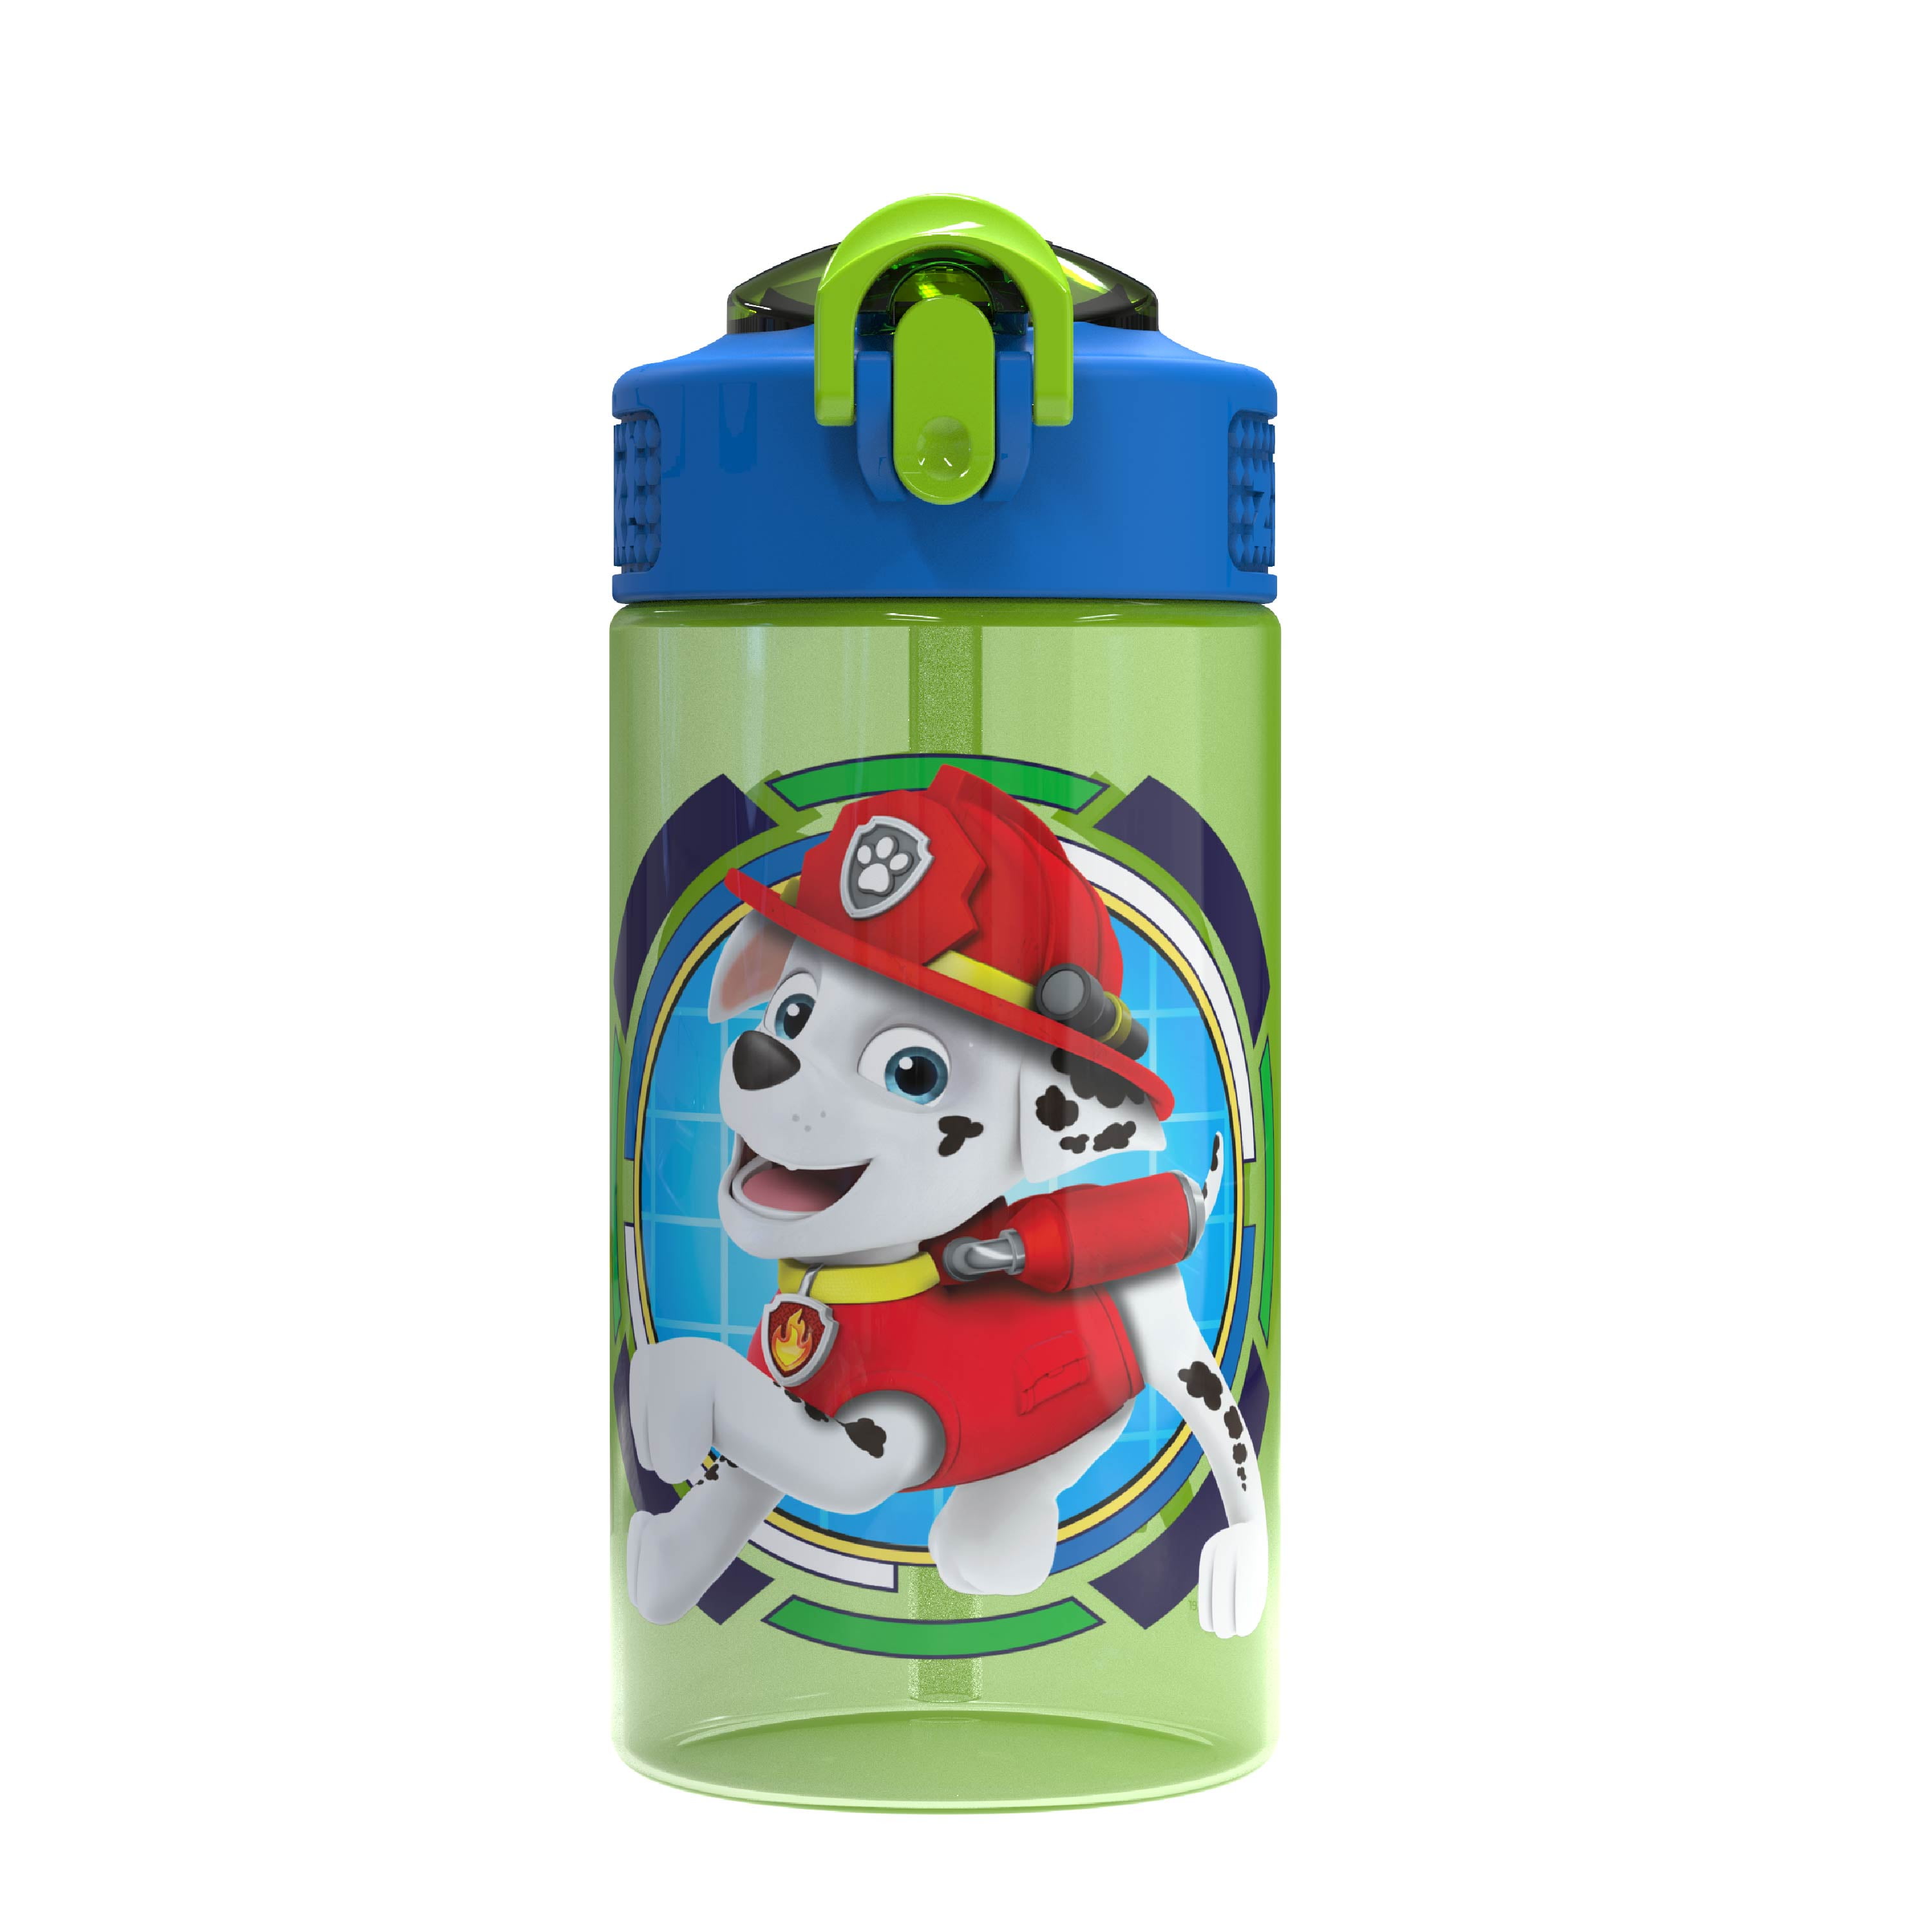 Leak-Proof Water Design for Travel, Zak Designs Kids Durable Plastic Spout Cover and Built-in Carrying Loop Paw Patrol Marshall Bottle 2pk 2 Count Pack of 1 16oz, 2pc Set 